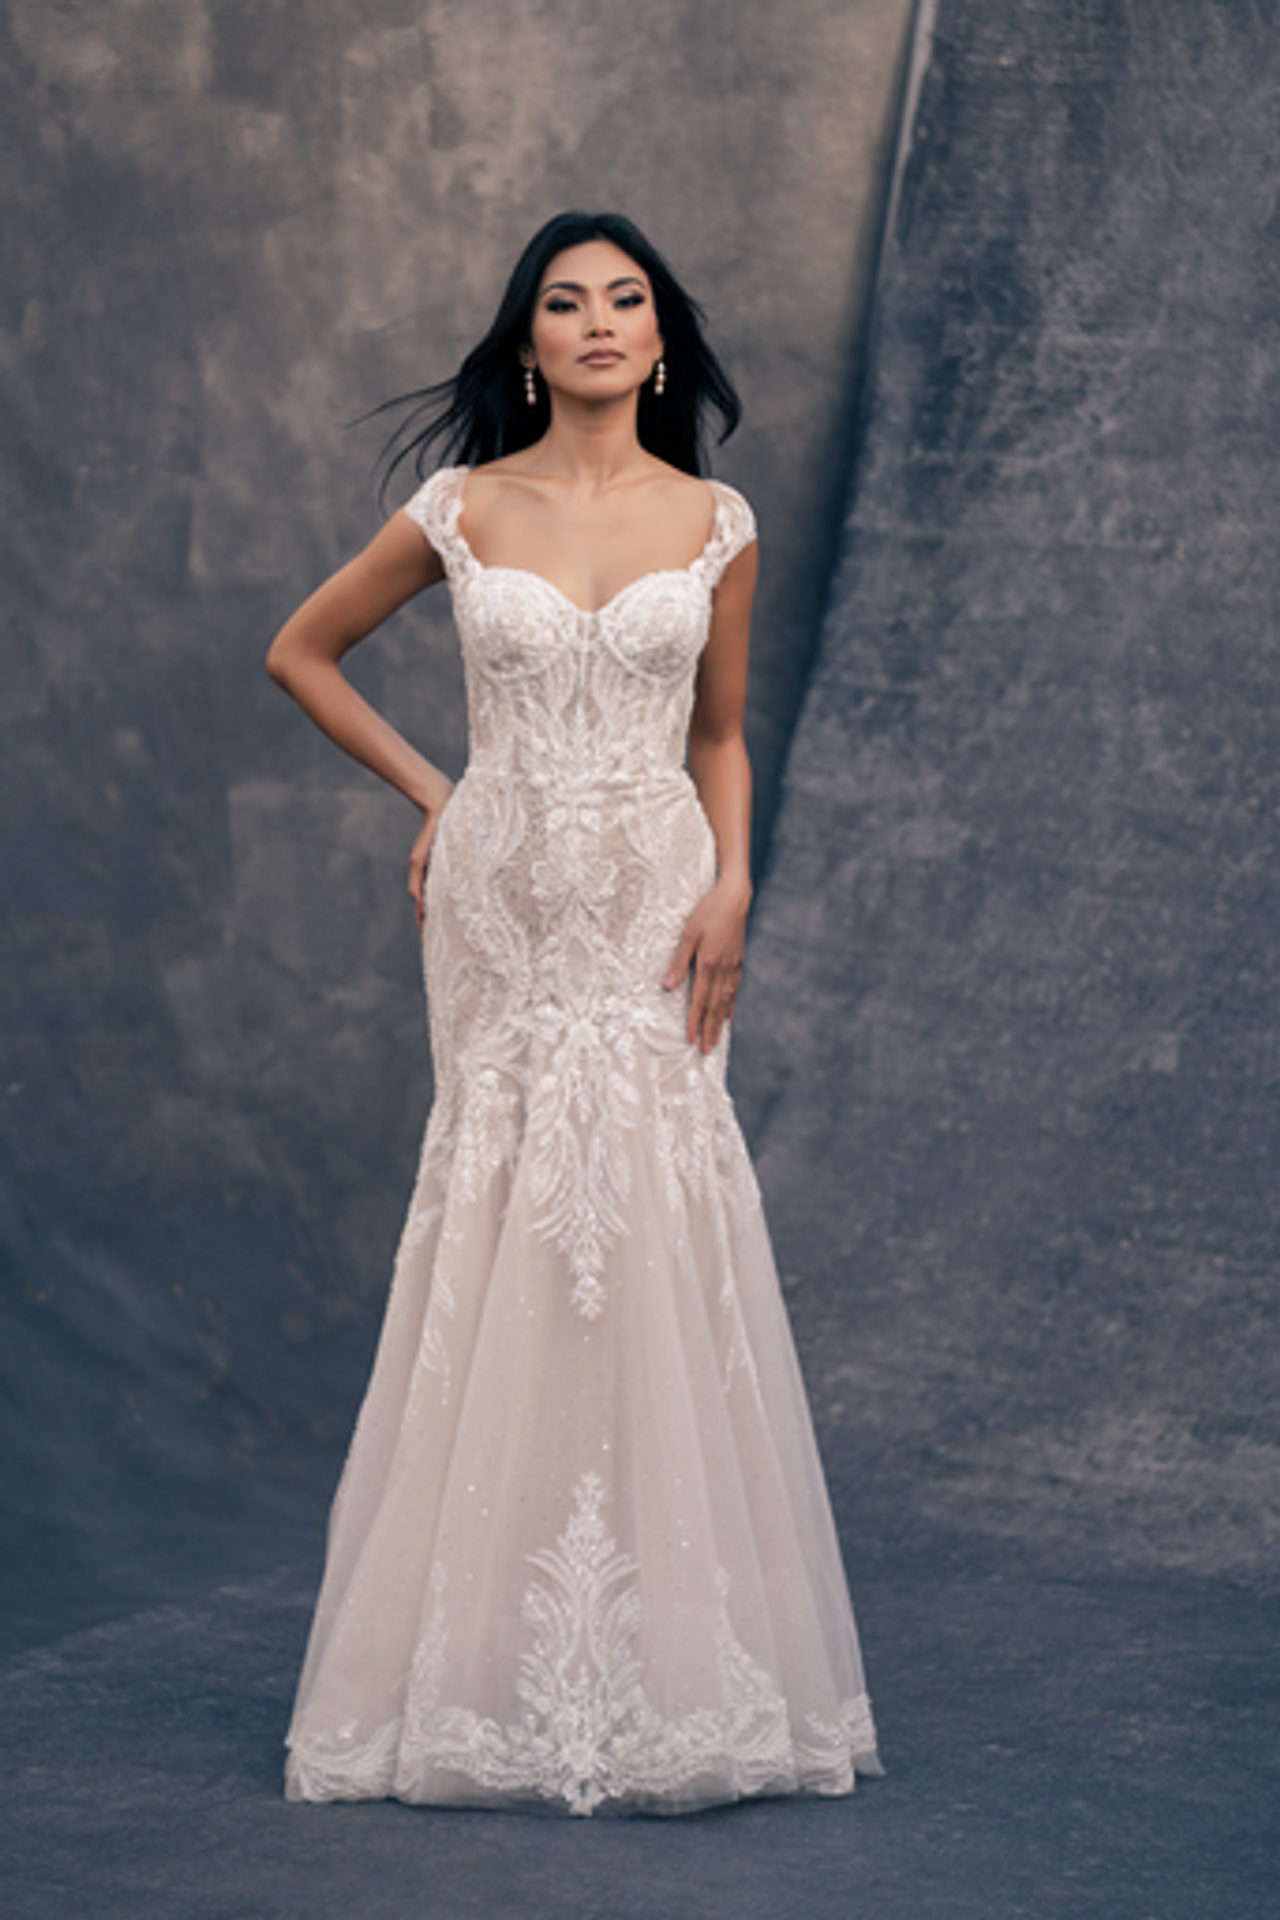 Romanic And Sexy Exposed Boning Fit And Flare Gown by Allure Bridals